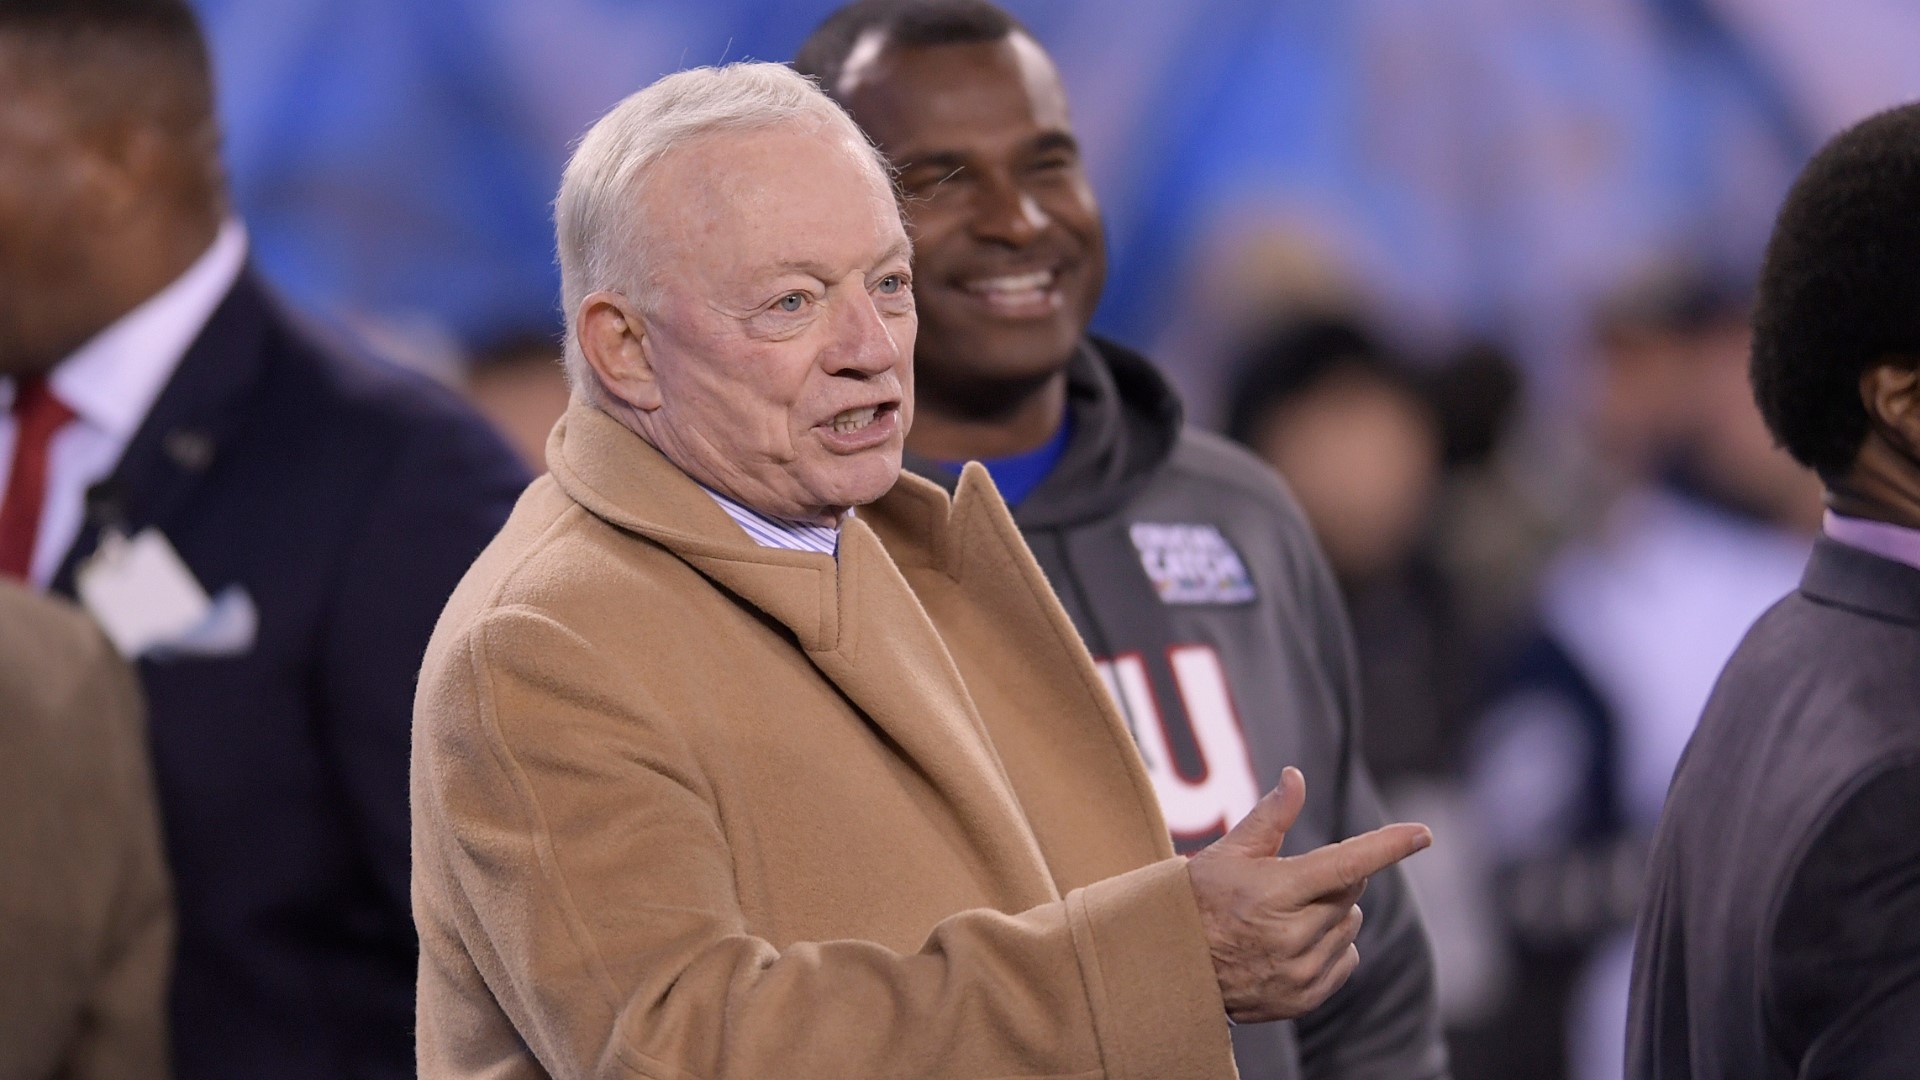 Dallas Cowboys owner Jerry Jones was cut off by the station's dump system when he swore during the interview.